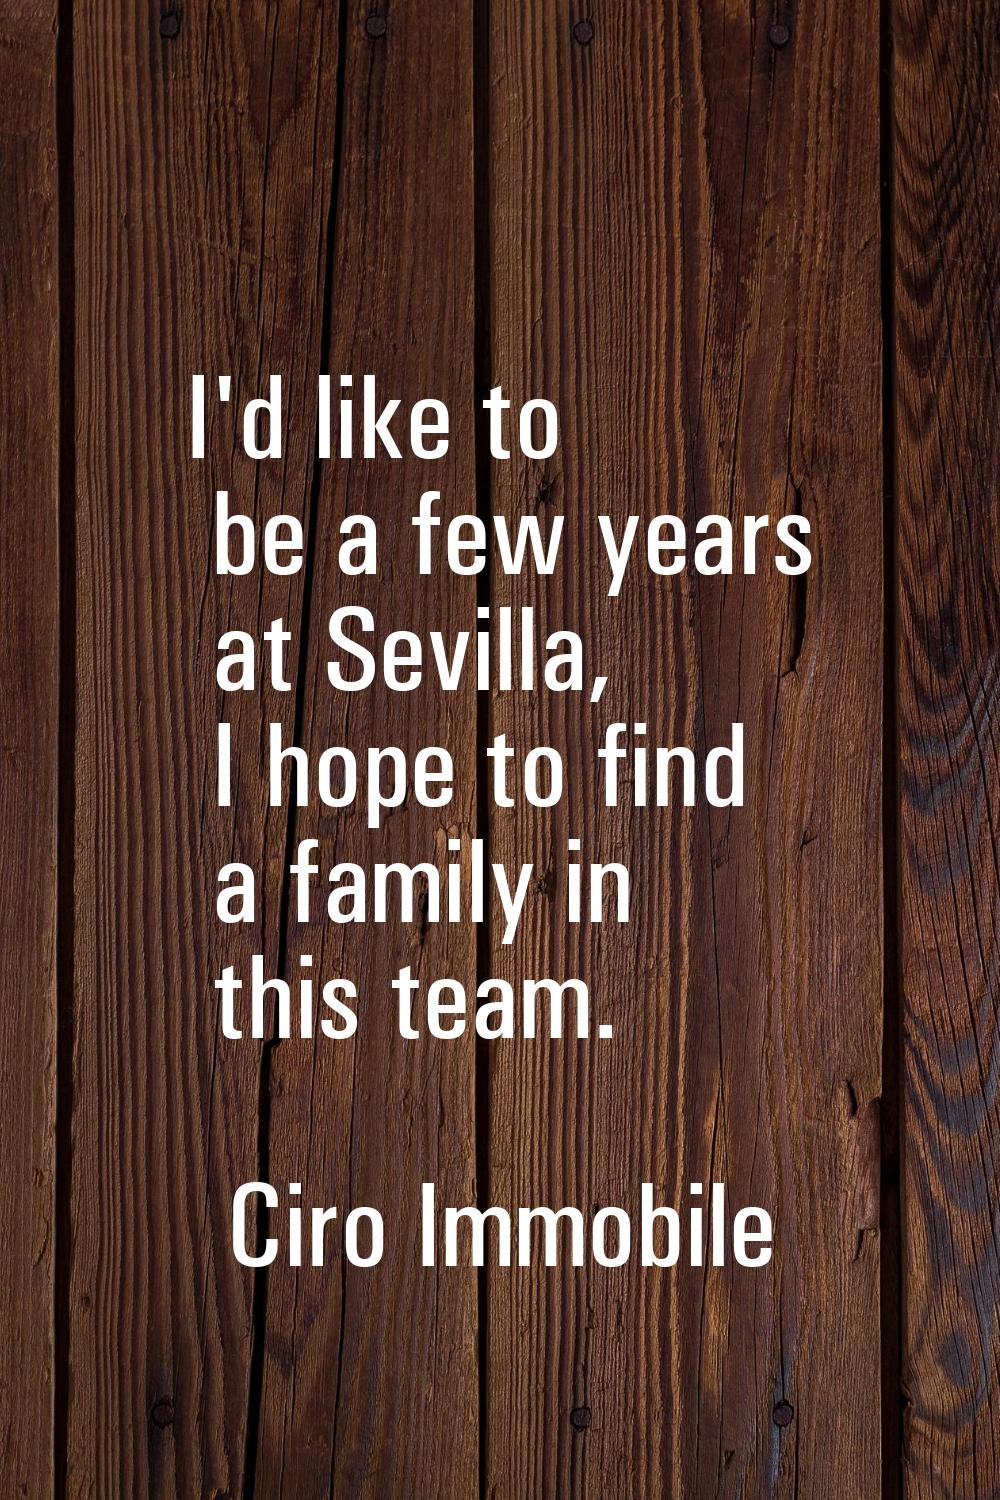 I'd like to be a few years at Sevilla, I hope to find a family in this team.